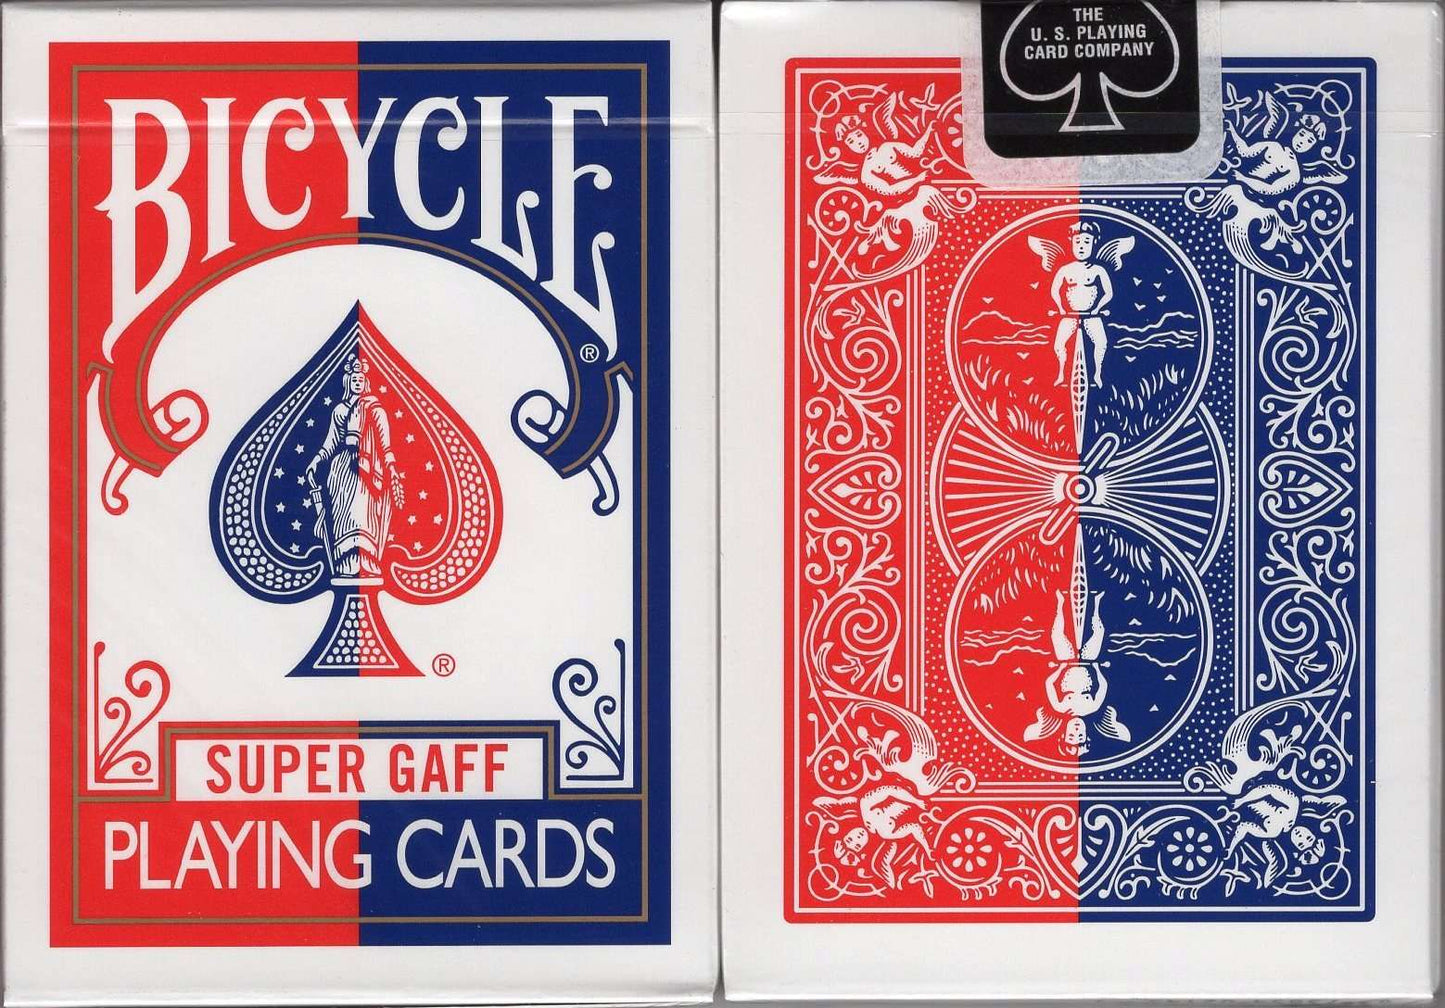 PlayingCardDecks.com-Red Super Gaff Bicycle Playing Cards: Red